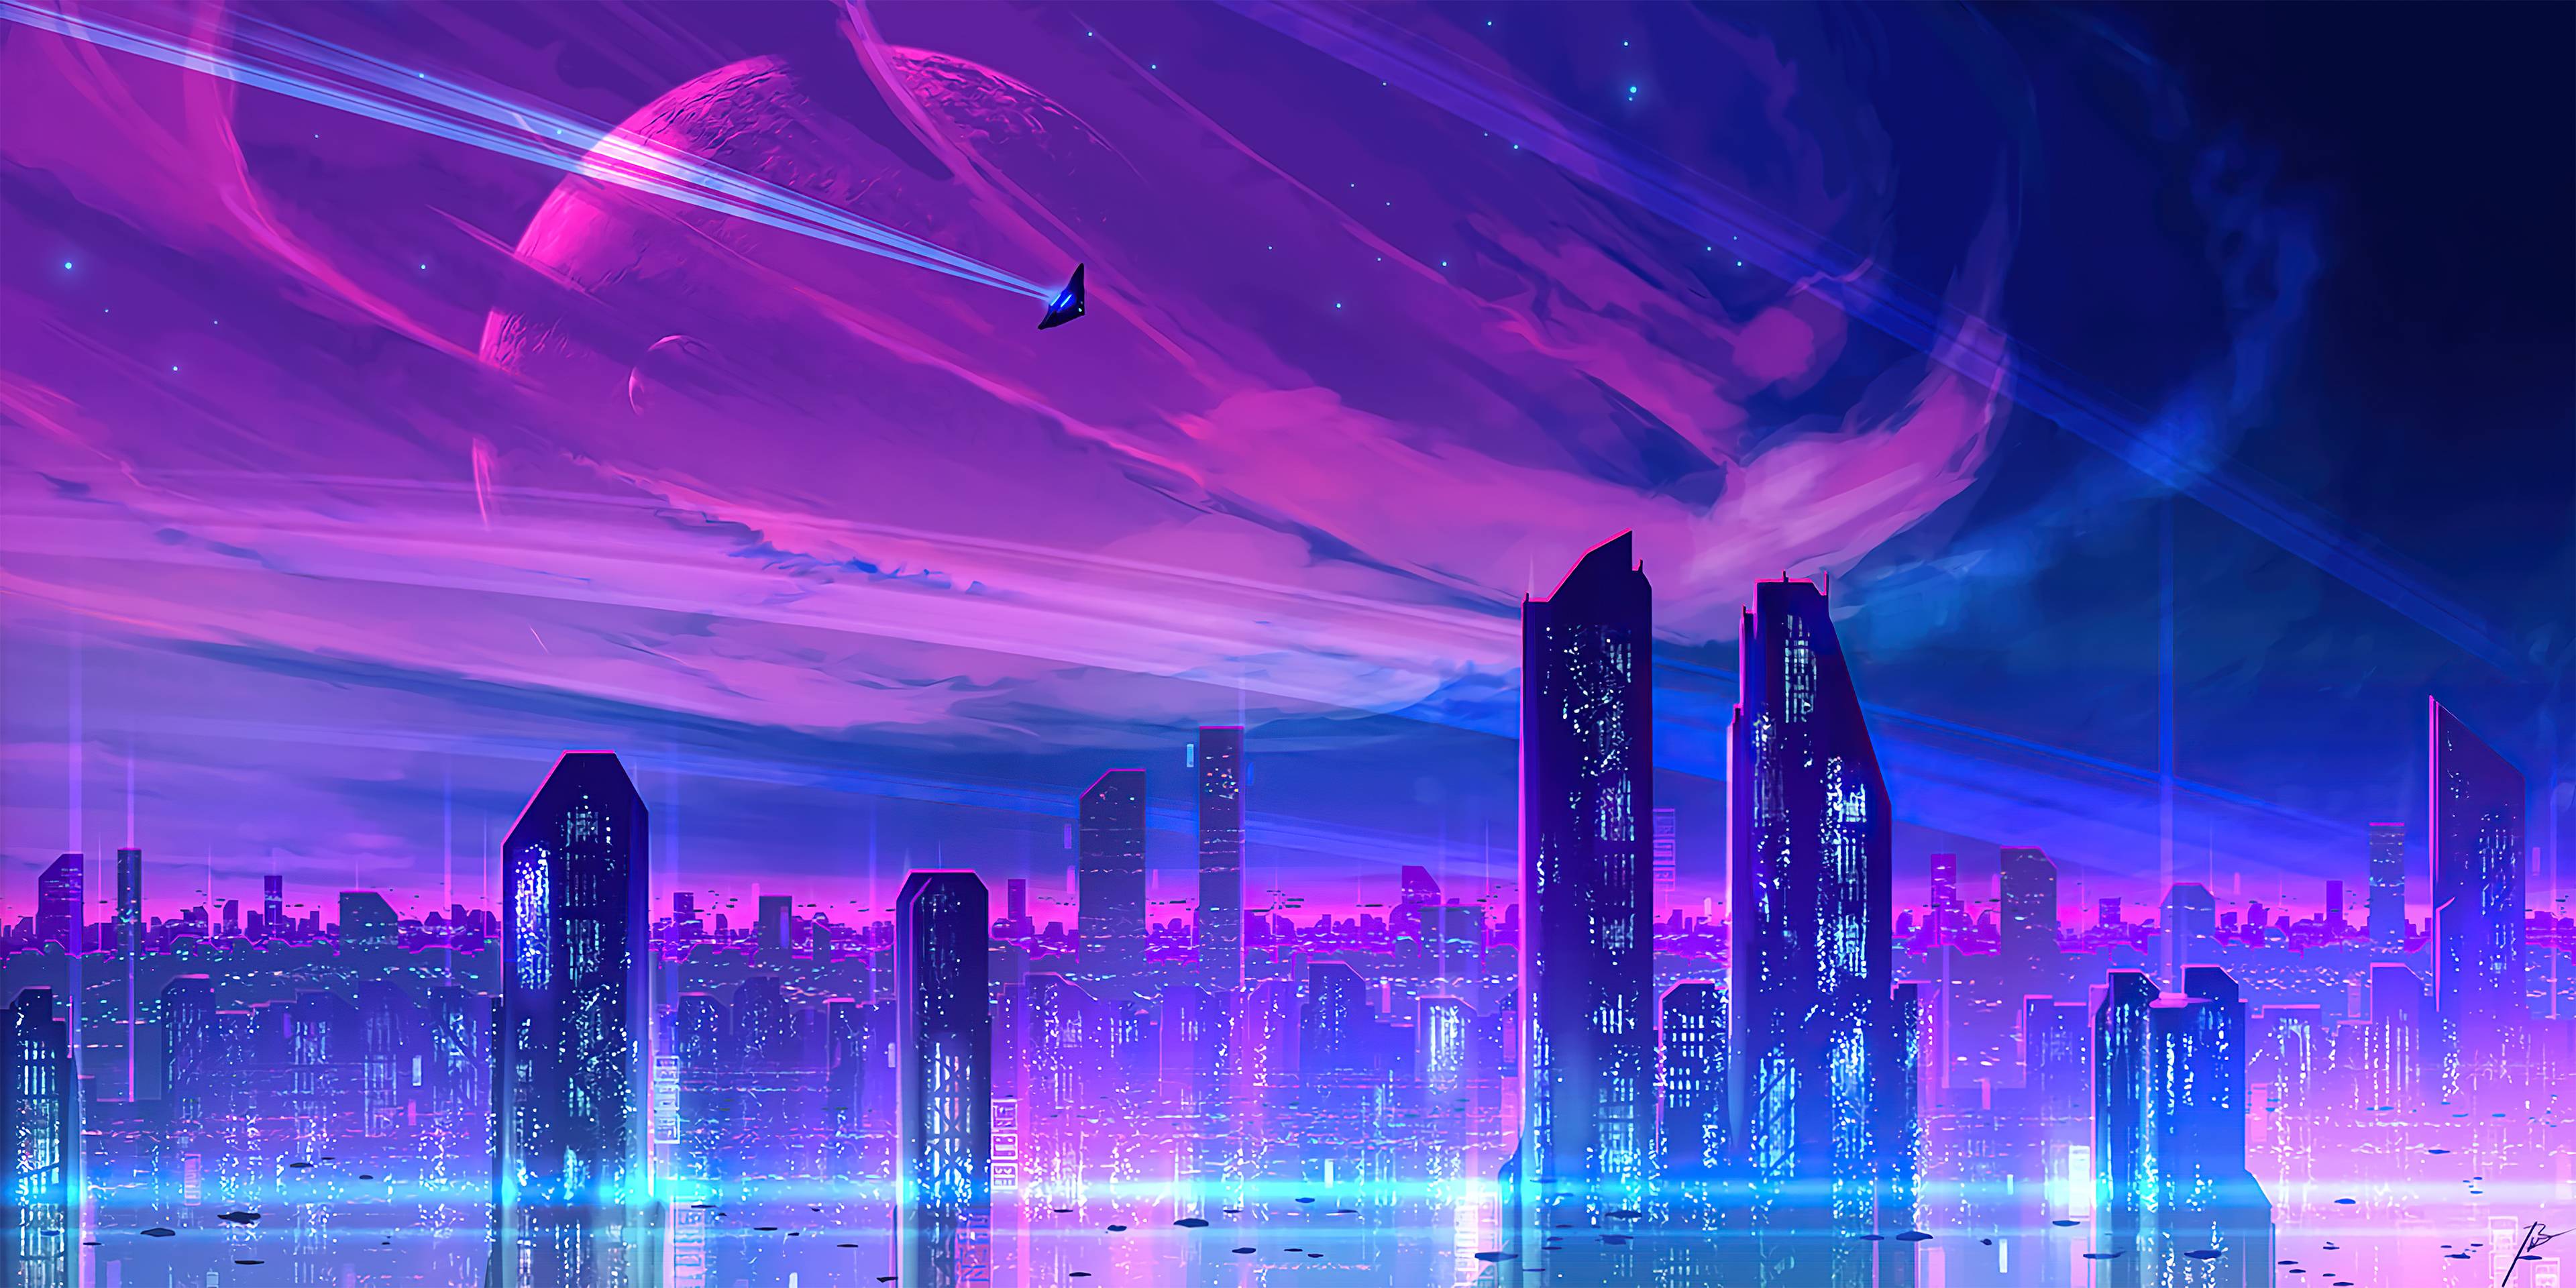 Neon City 4k Wallpapers Top Free Neon City 4k Backgrounds Wallpaperaccess 6546